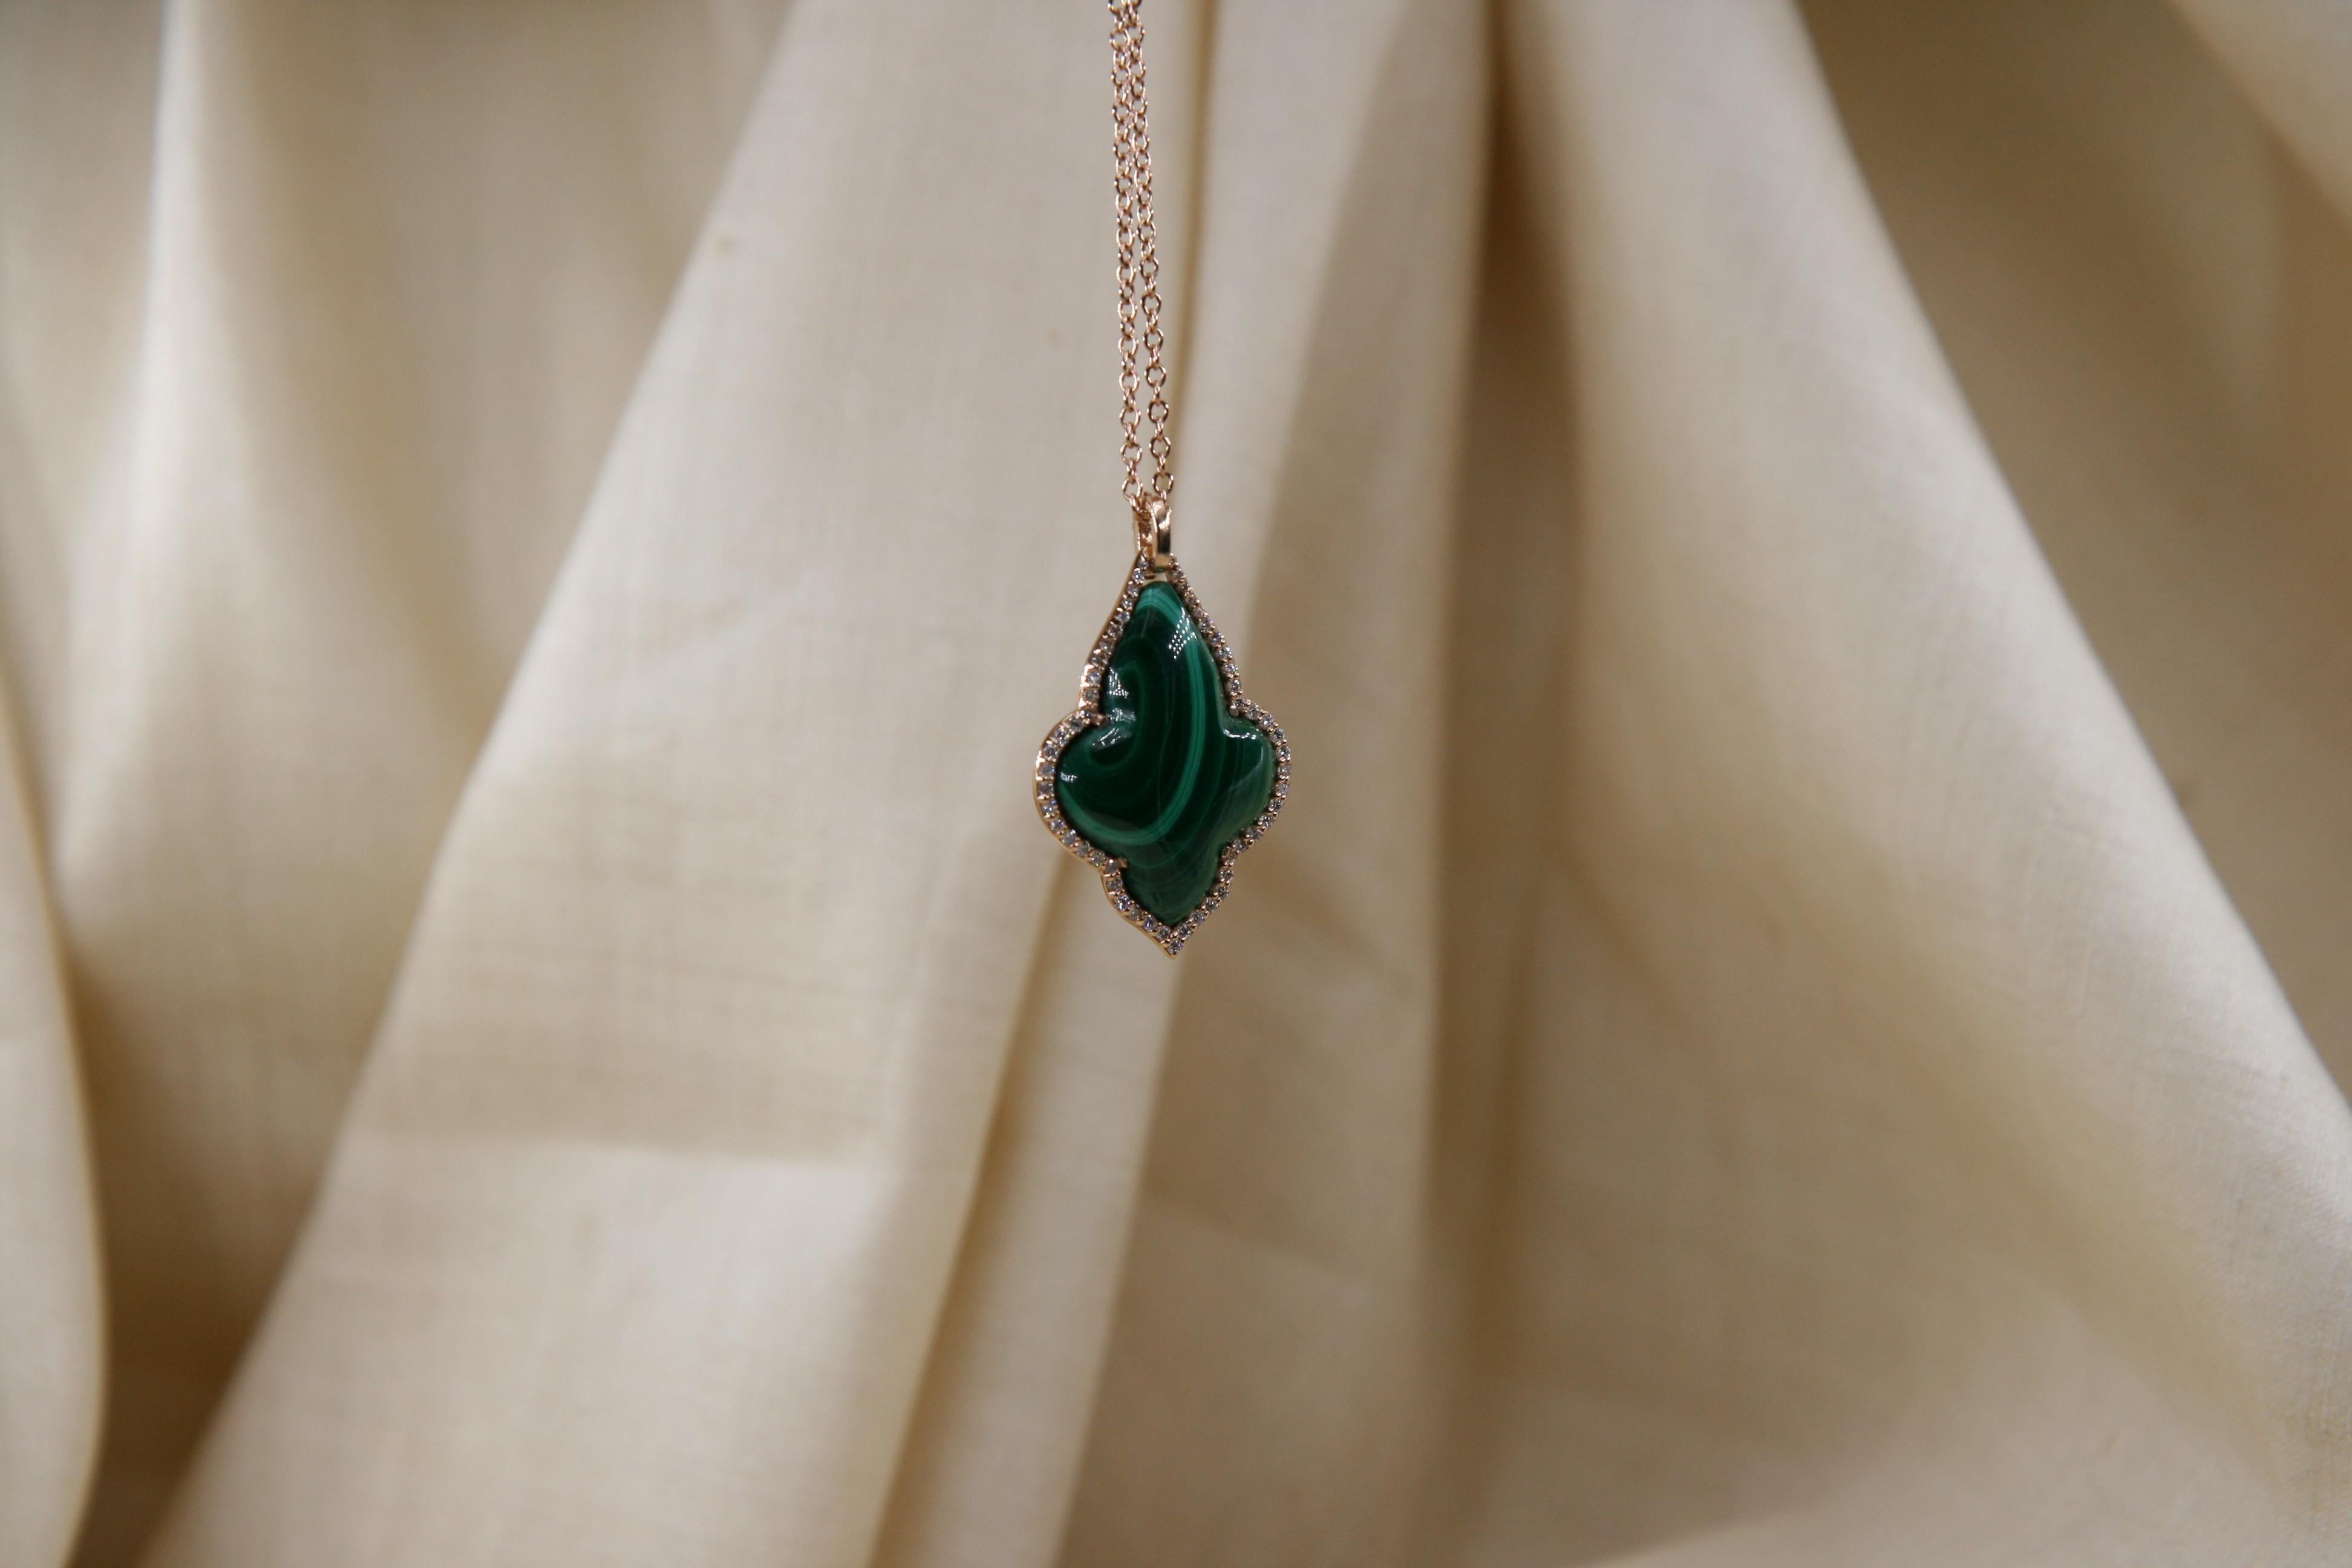 This wonderful Leo Milano pendant from our Carrobbio collection shows in every detail a very complicate yet perfectly done workmanship. The pendant and the chain are in 18 carat rose gold with malachite . The object weights 9.81 grams the total